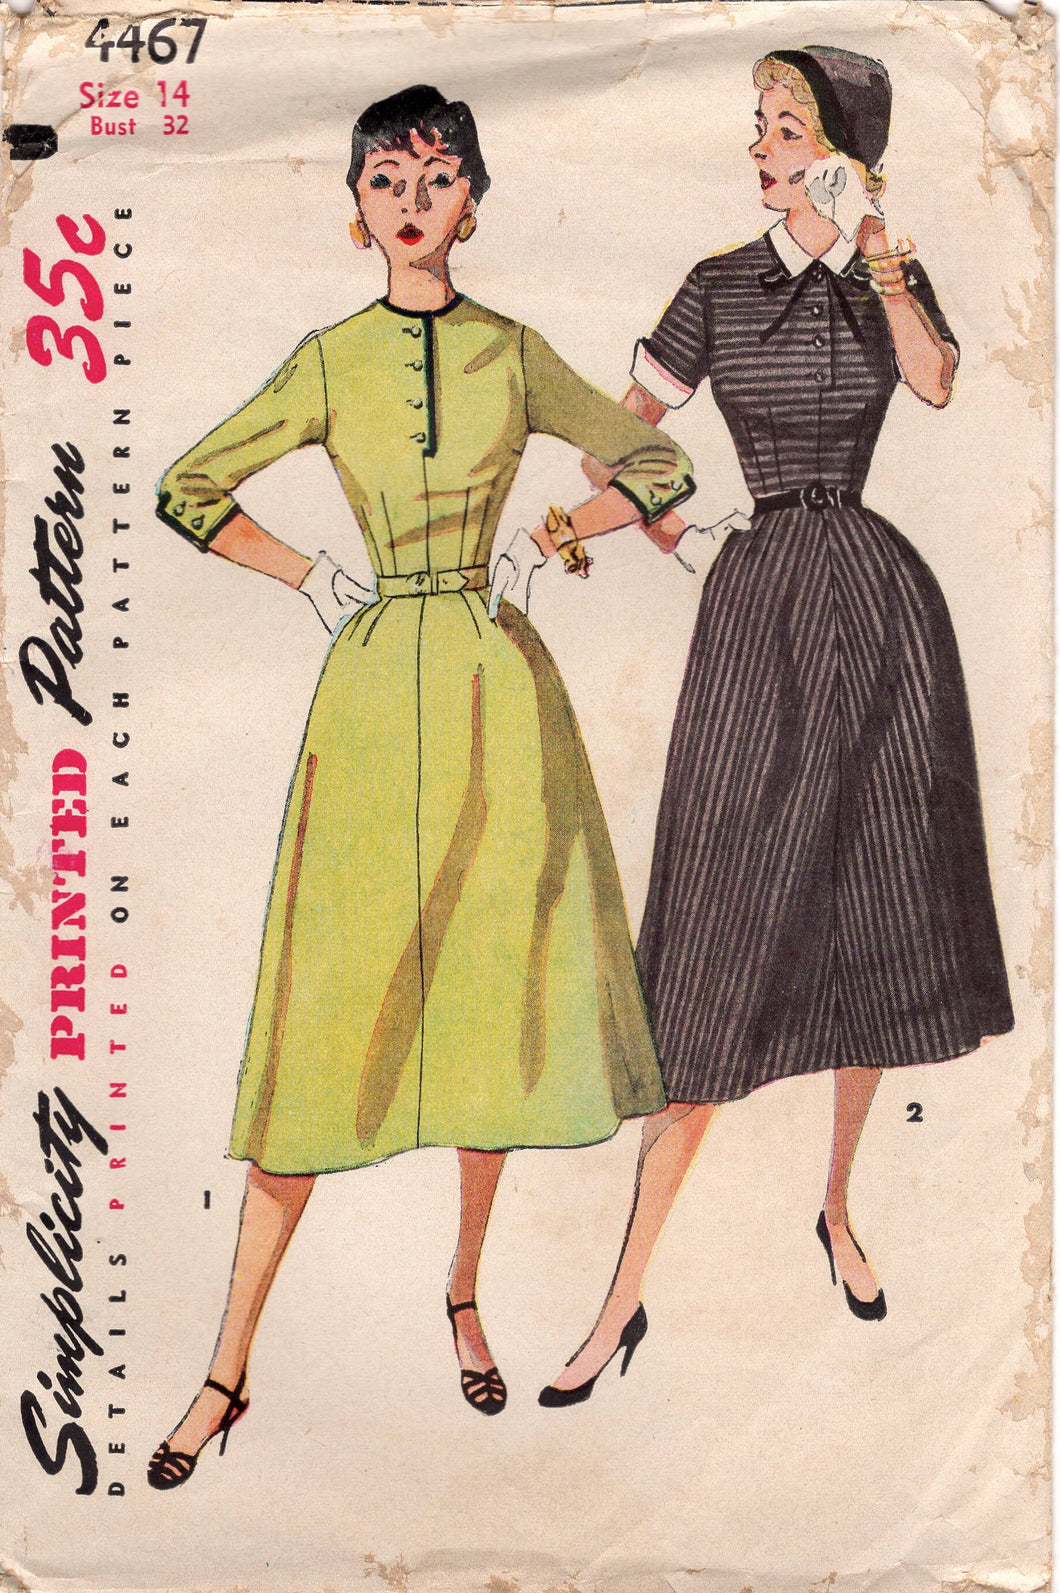 1950's Simplicity Fit and Flare Dress Pattern with Three Quarter or Short Sleeves - Bust 32